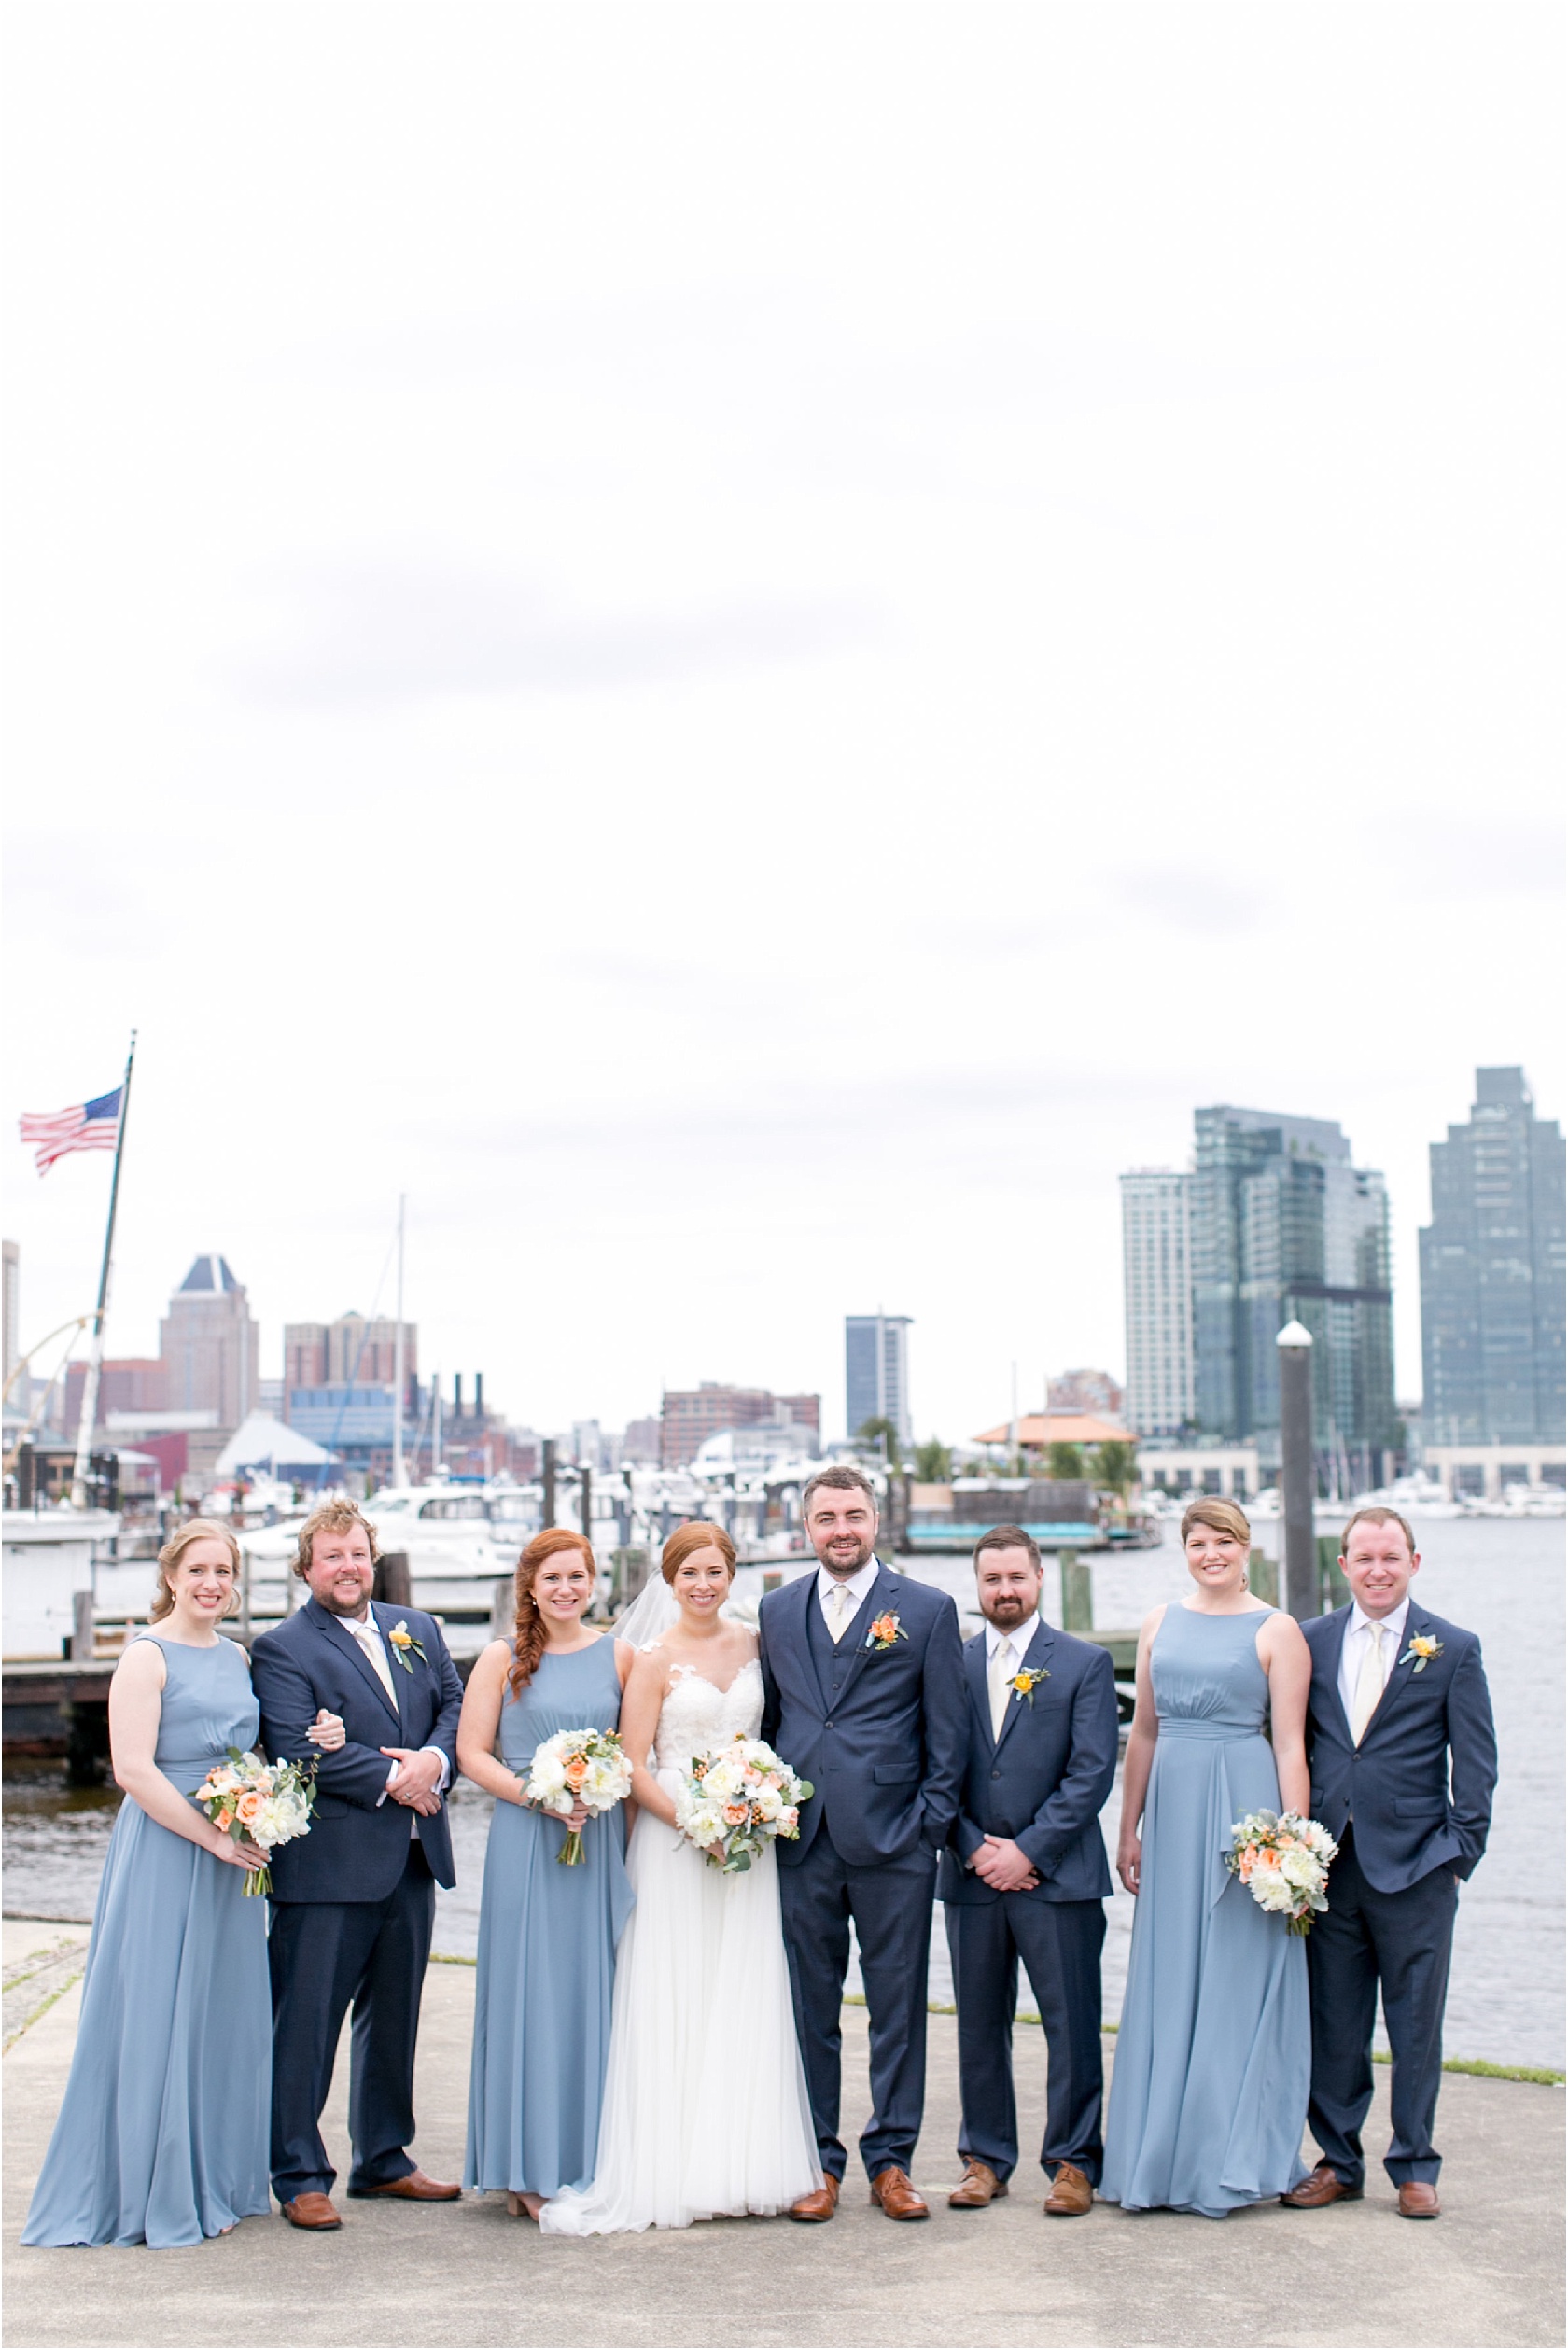 Rowland Baltimore Museum of Industry Wedding Living Radiant Photography photos_0068.jpg